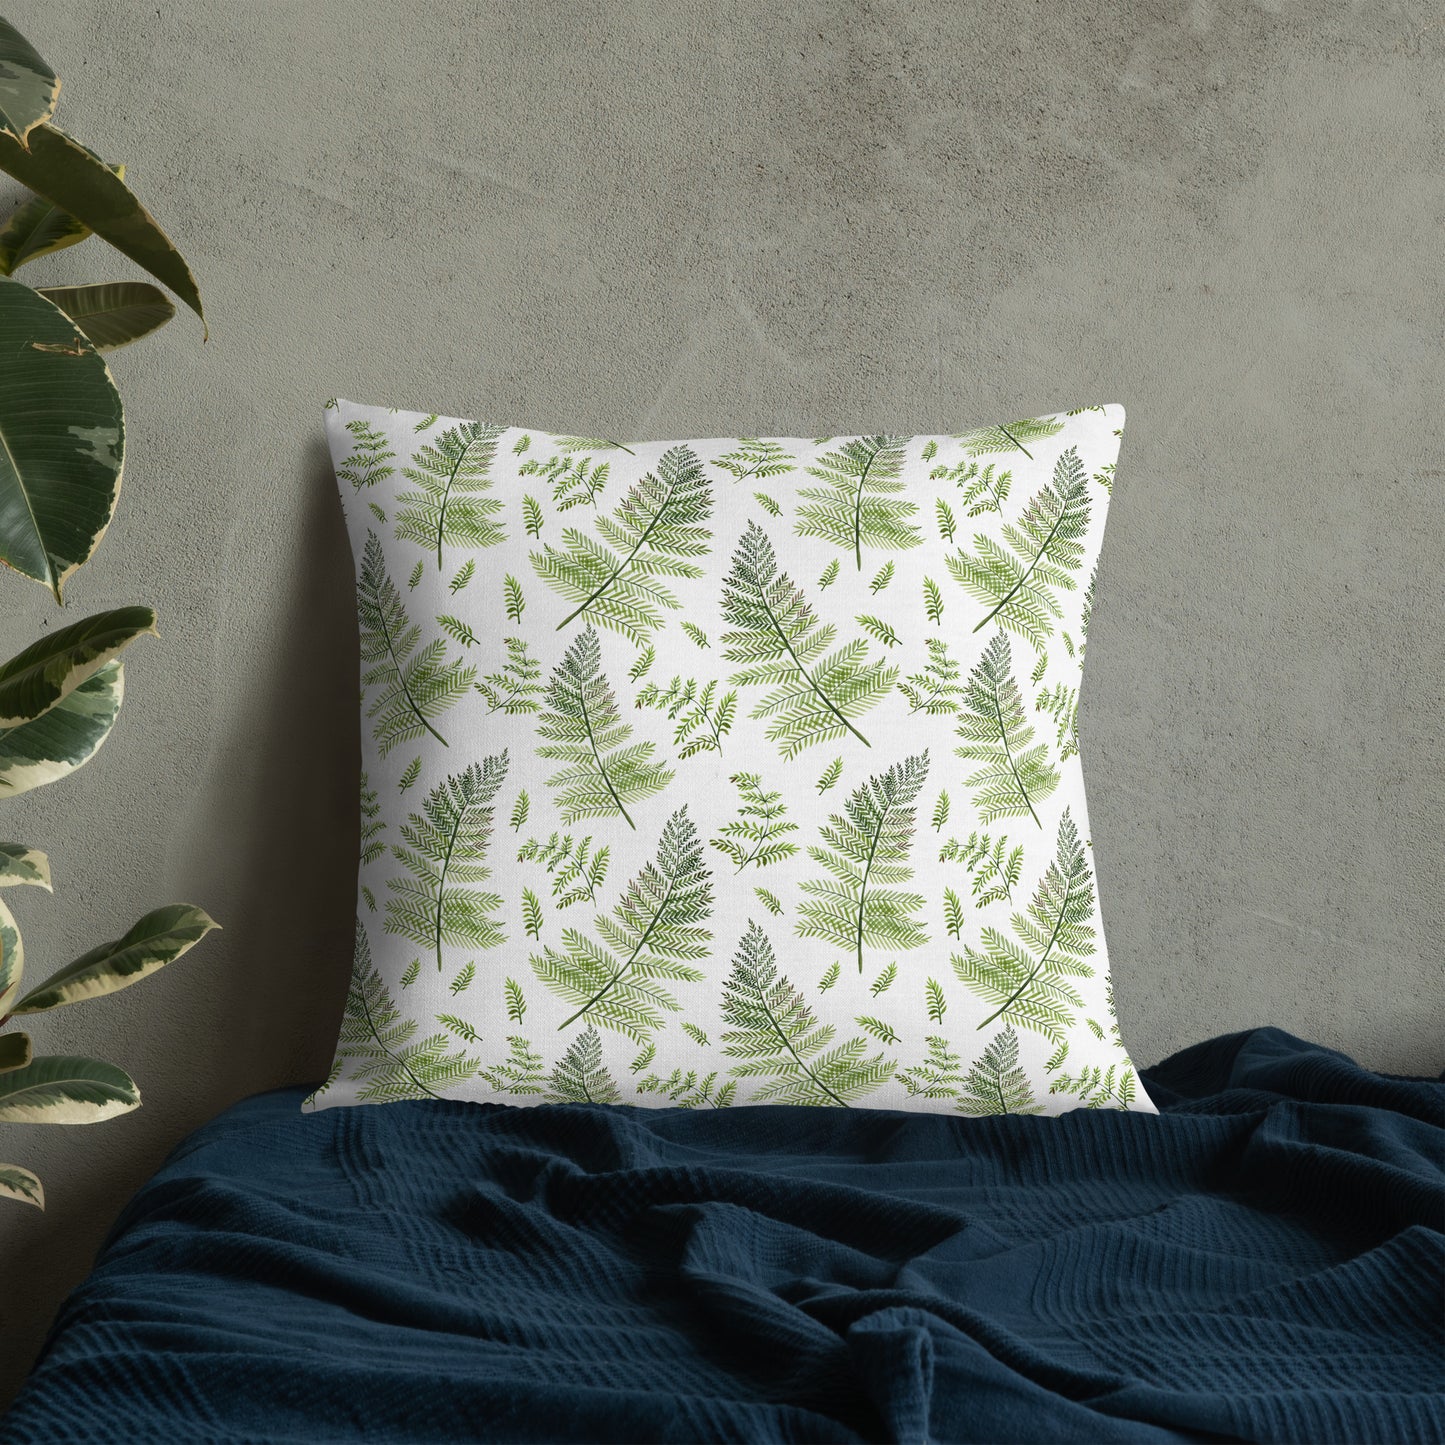 Decorative cushion 'fern leaves' with botanical illustrations | 45x45cm | with hidden zipper